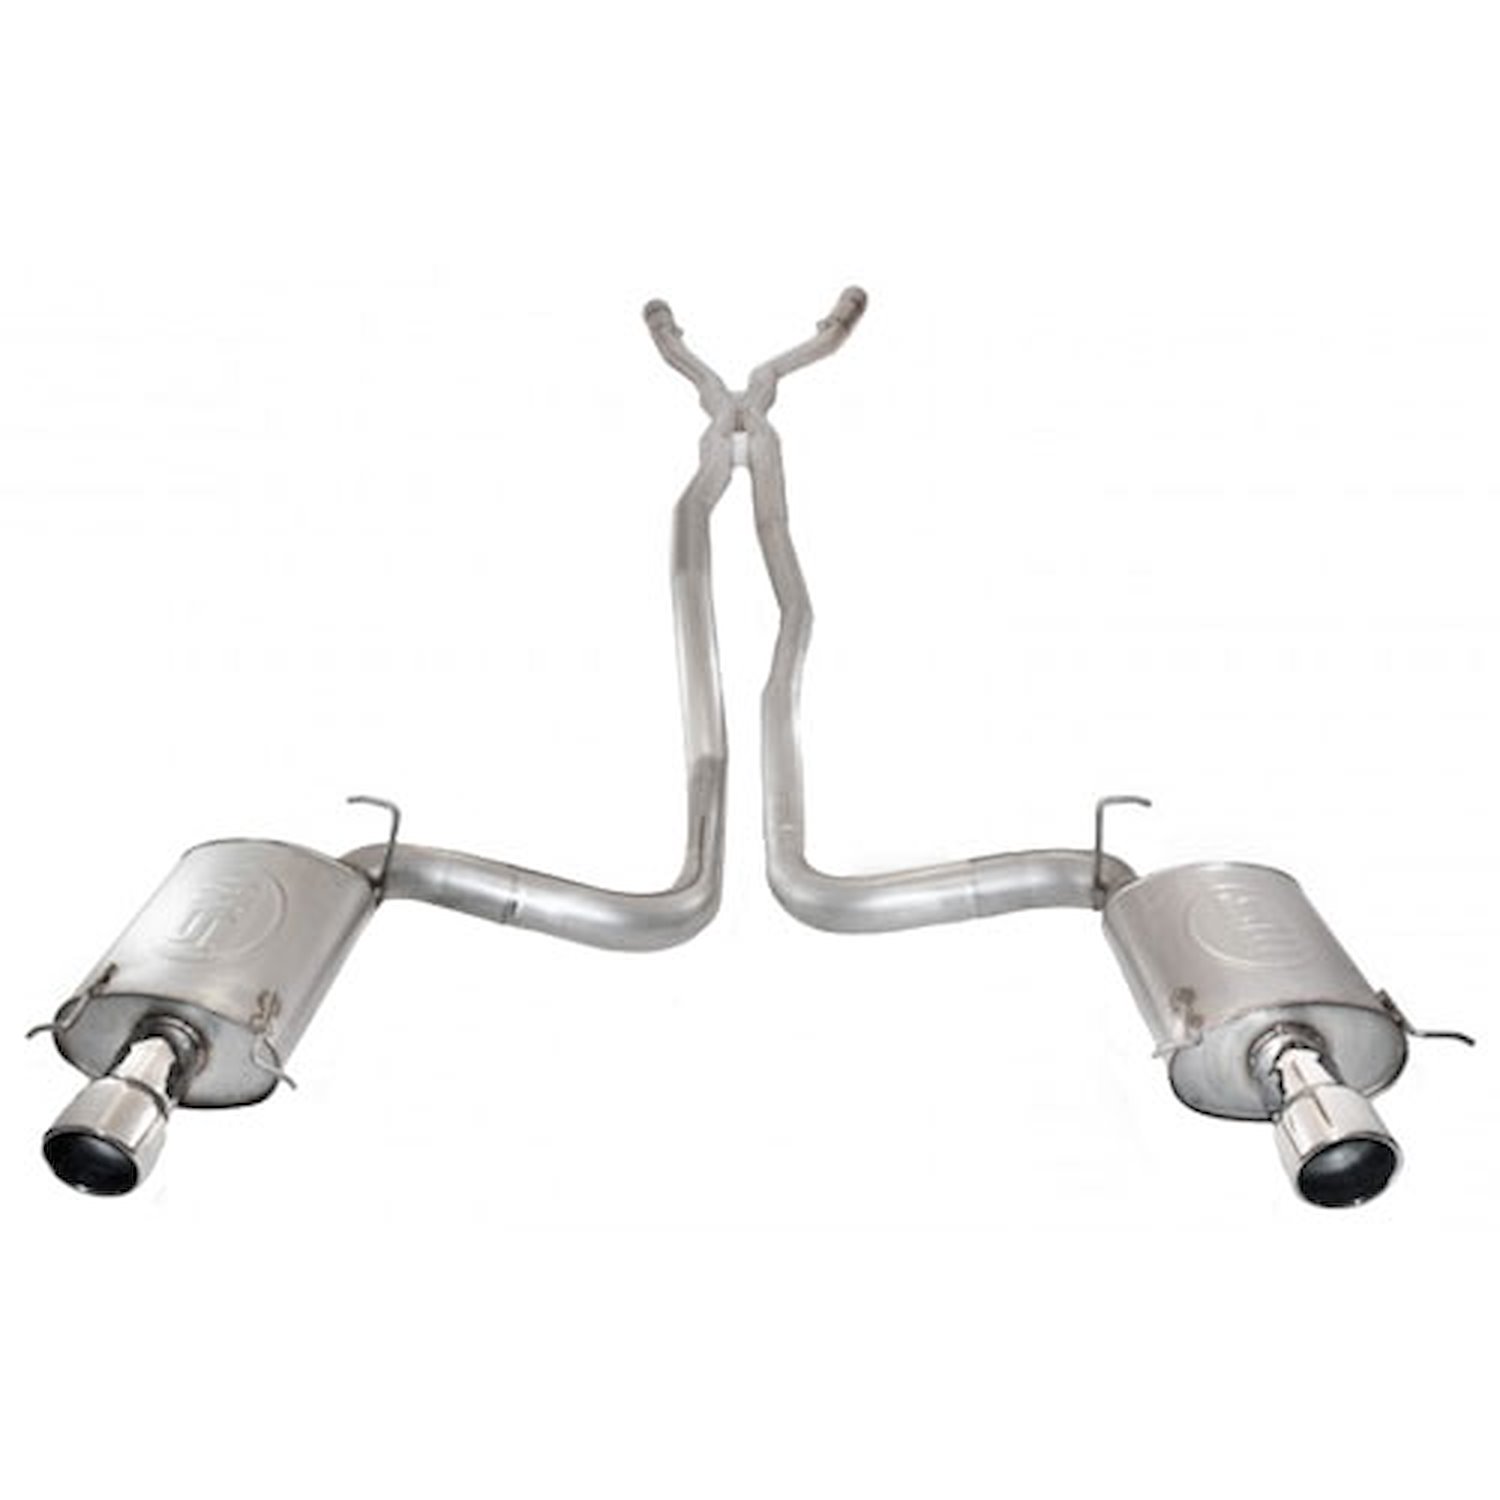 2004-2007 Cadillac CTS-V performance 304 stainless steel exhaust system with X-pipe for use with Sta